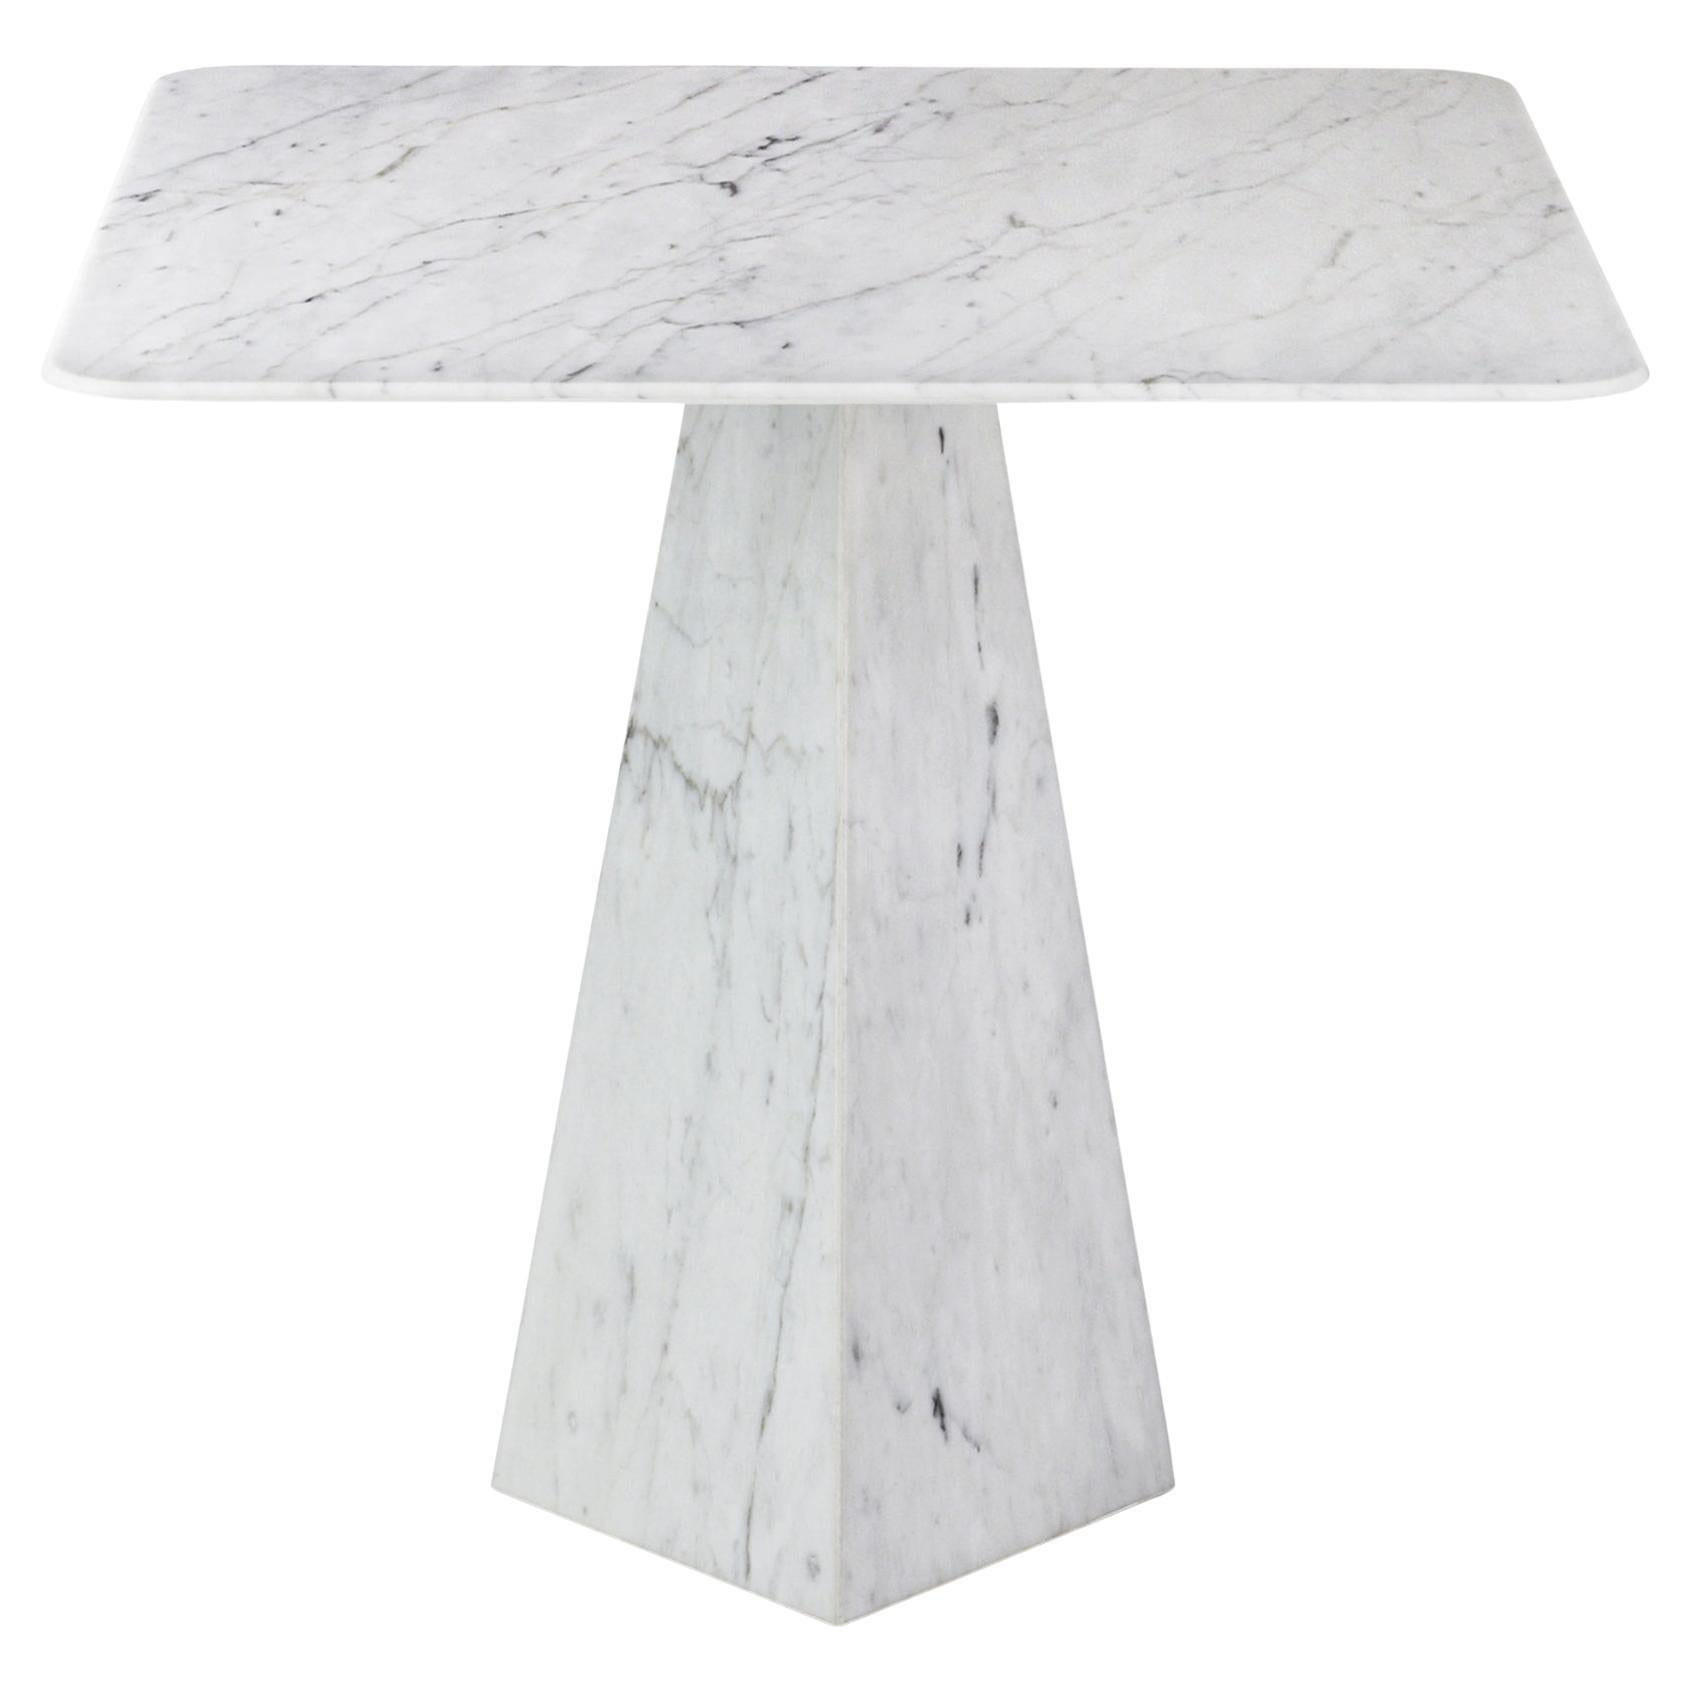 Pair of Ultra Thin White Carrara Marble Square Sidetables For Sale